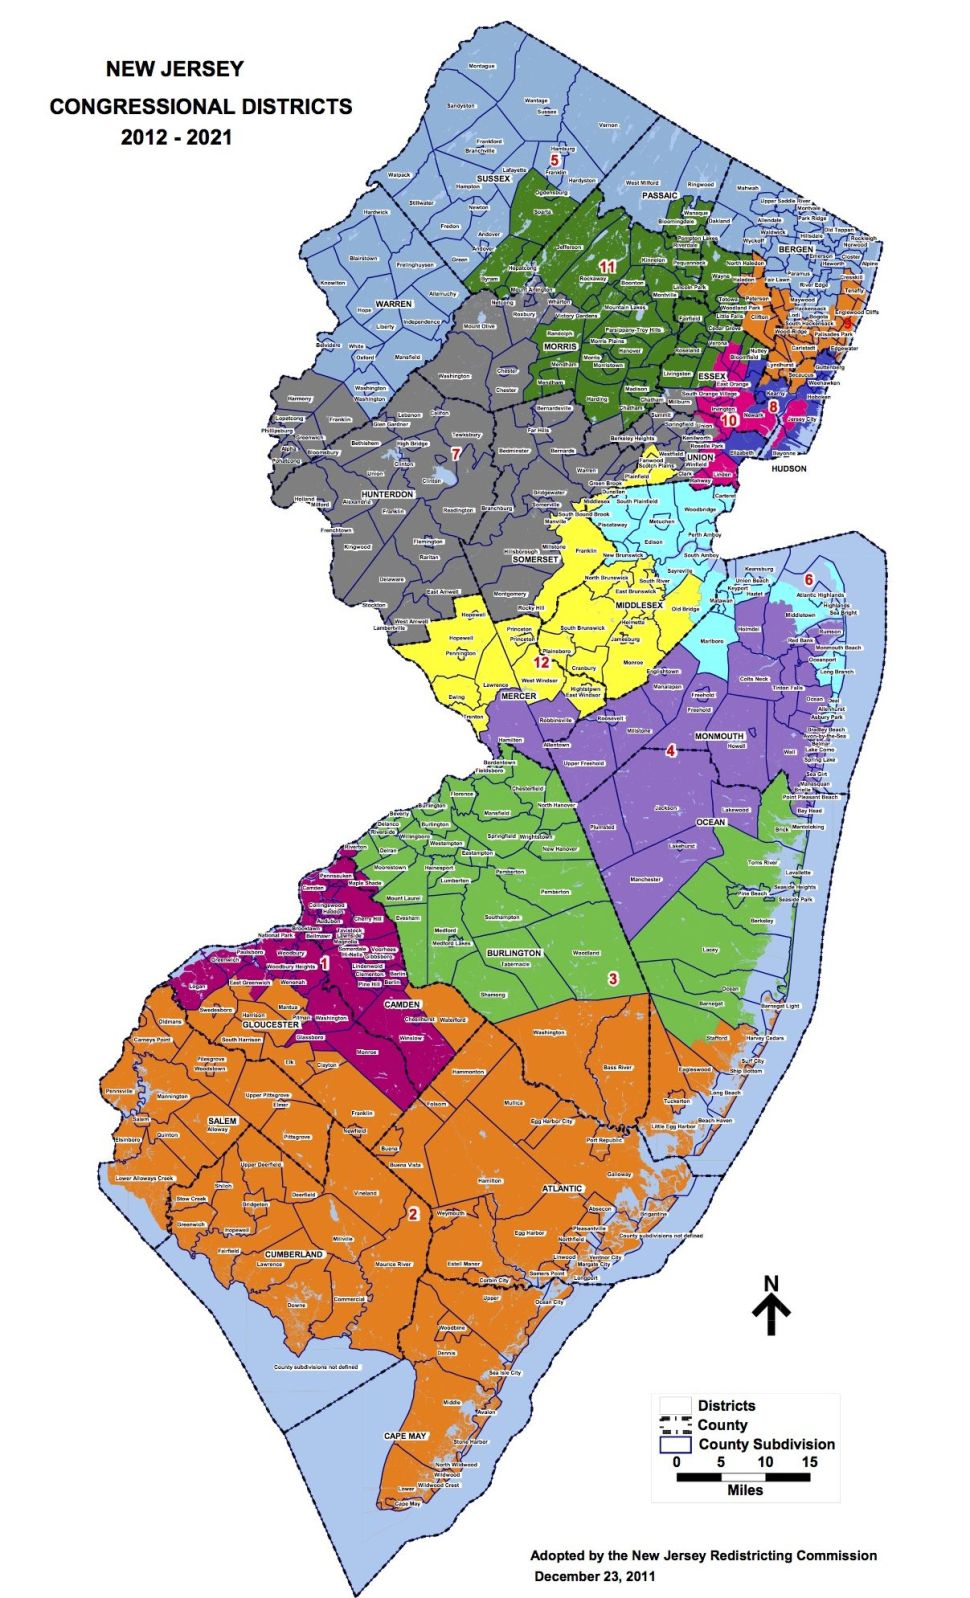 In December of 2011, the N.J. Redistricting Commission adopted the current 'New Jersey Congressional Districts: 2012-2021' map.